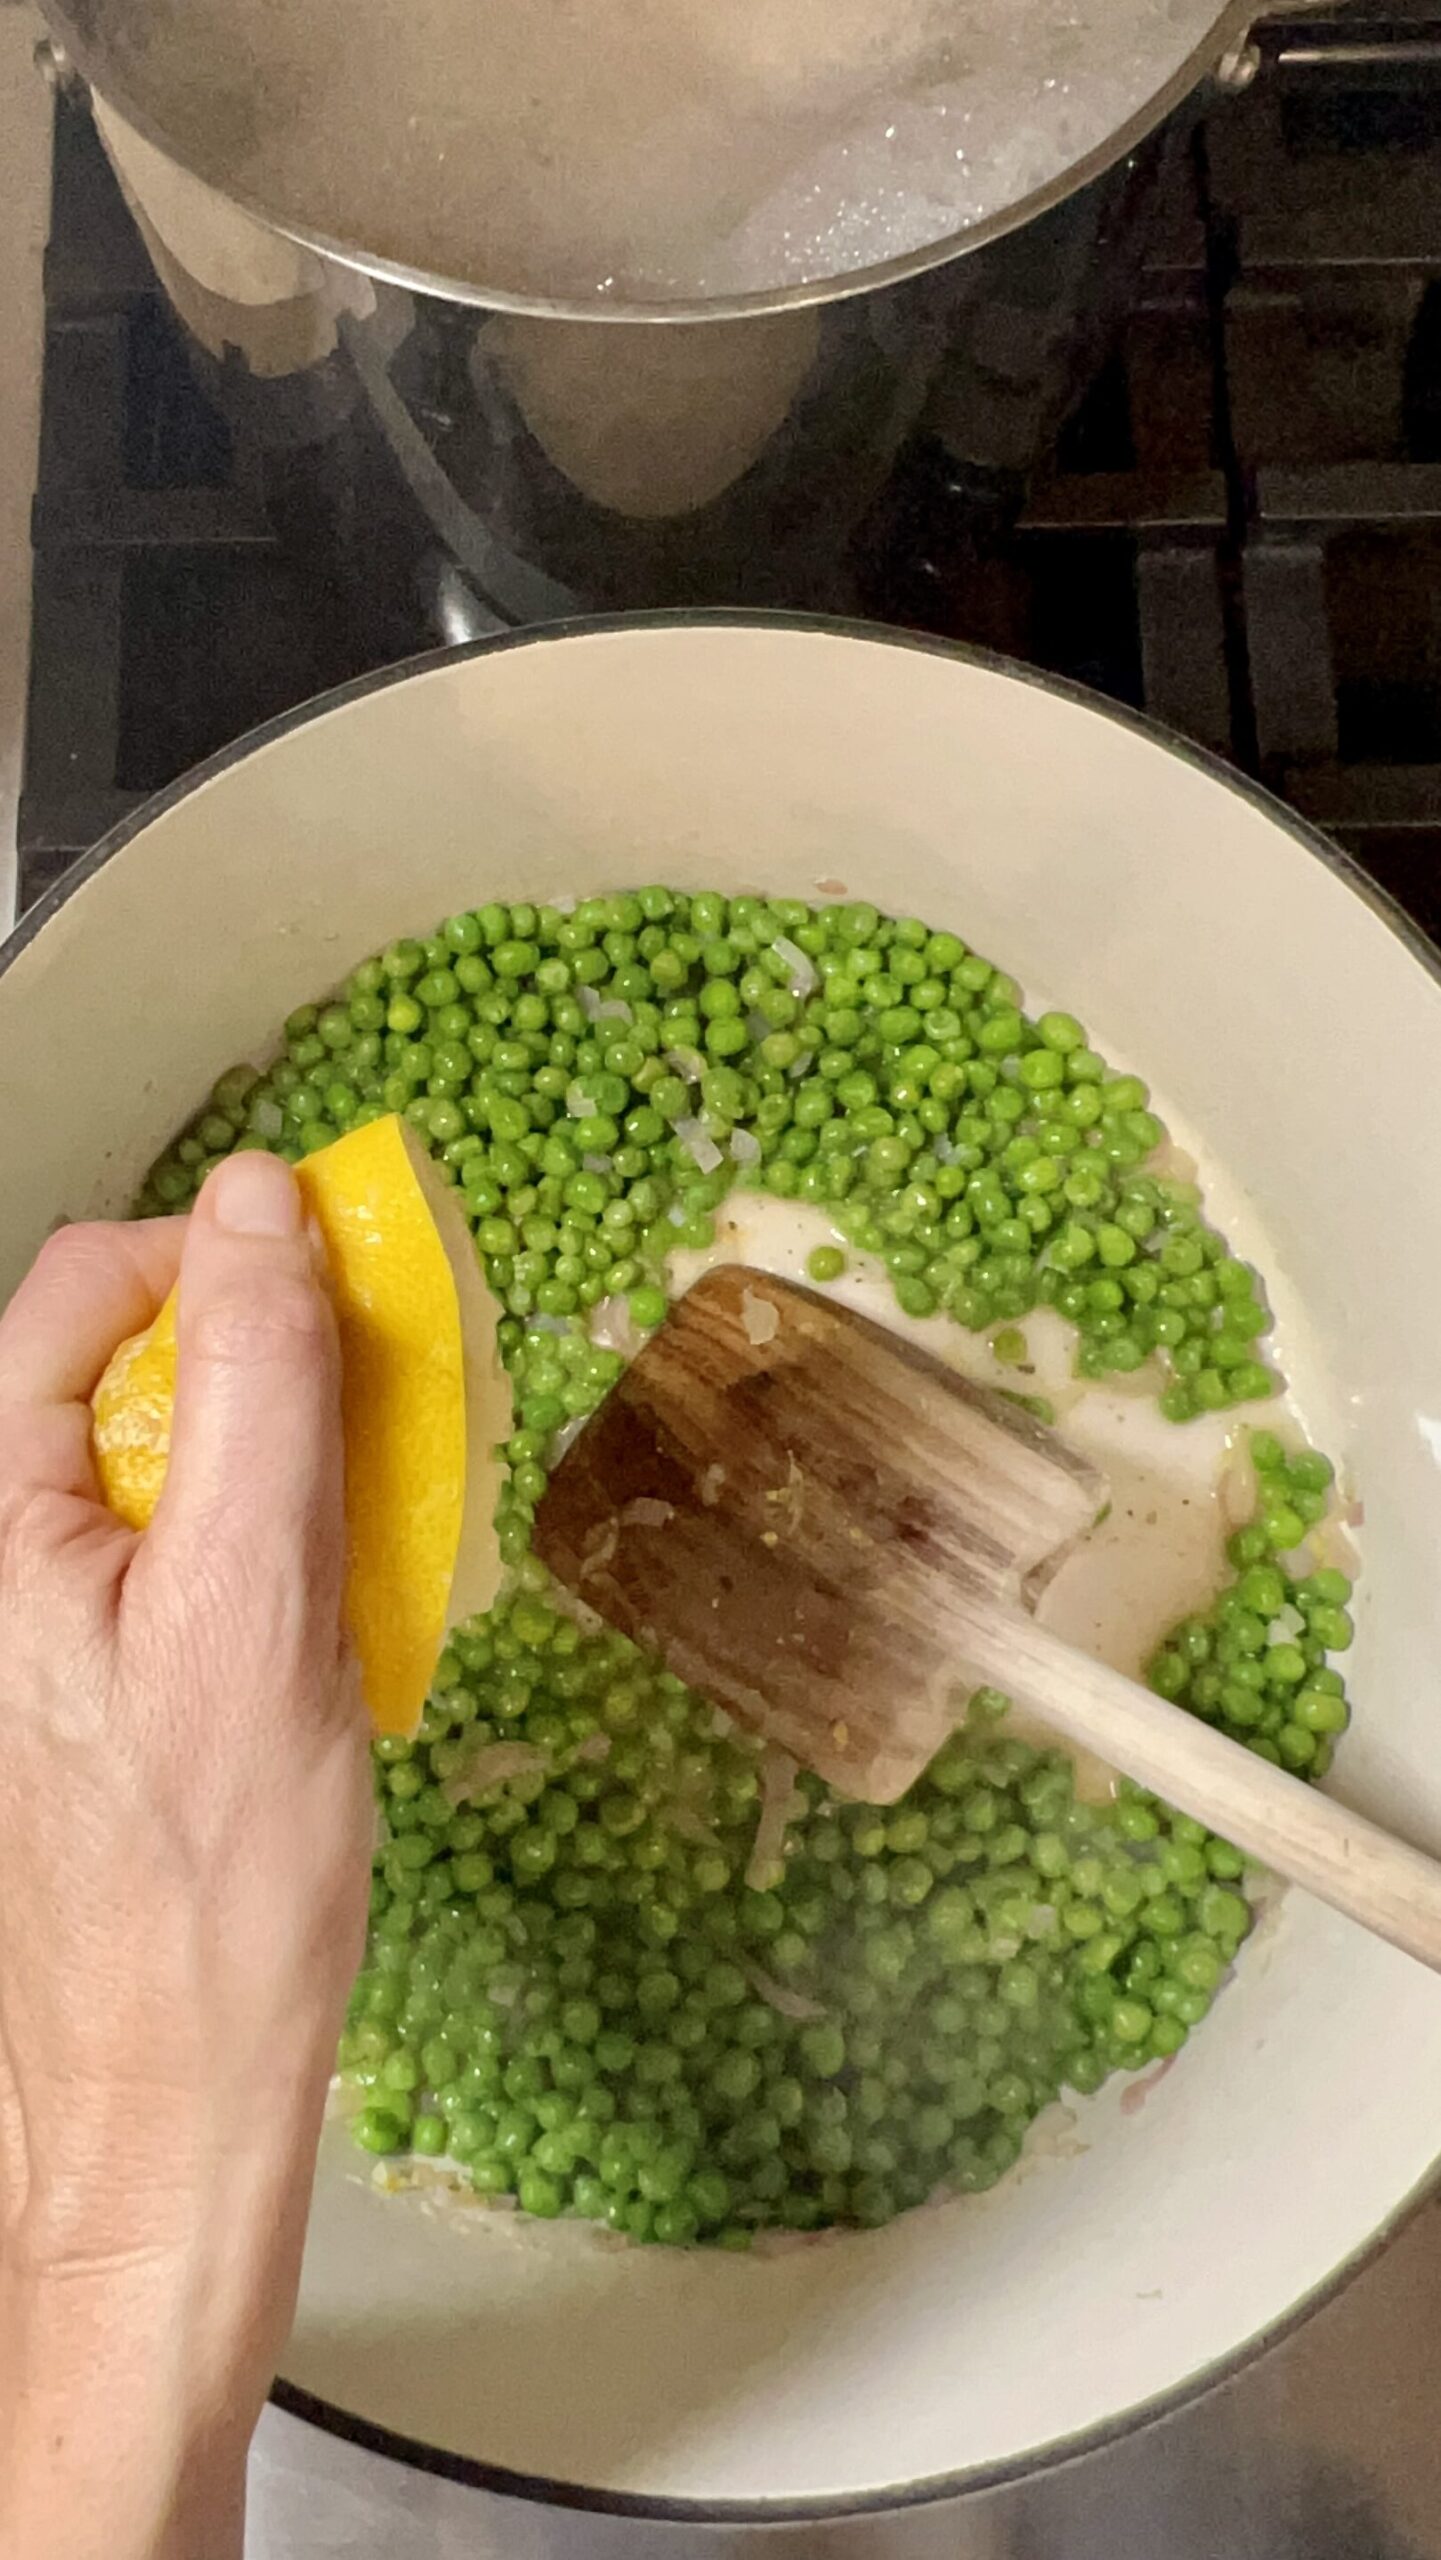 https://www.alecooks.com/wp-content/uploads/2022/05/peas-and-pasta-1-edited-scaled.jpg